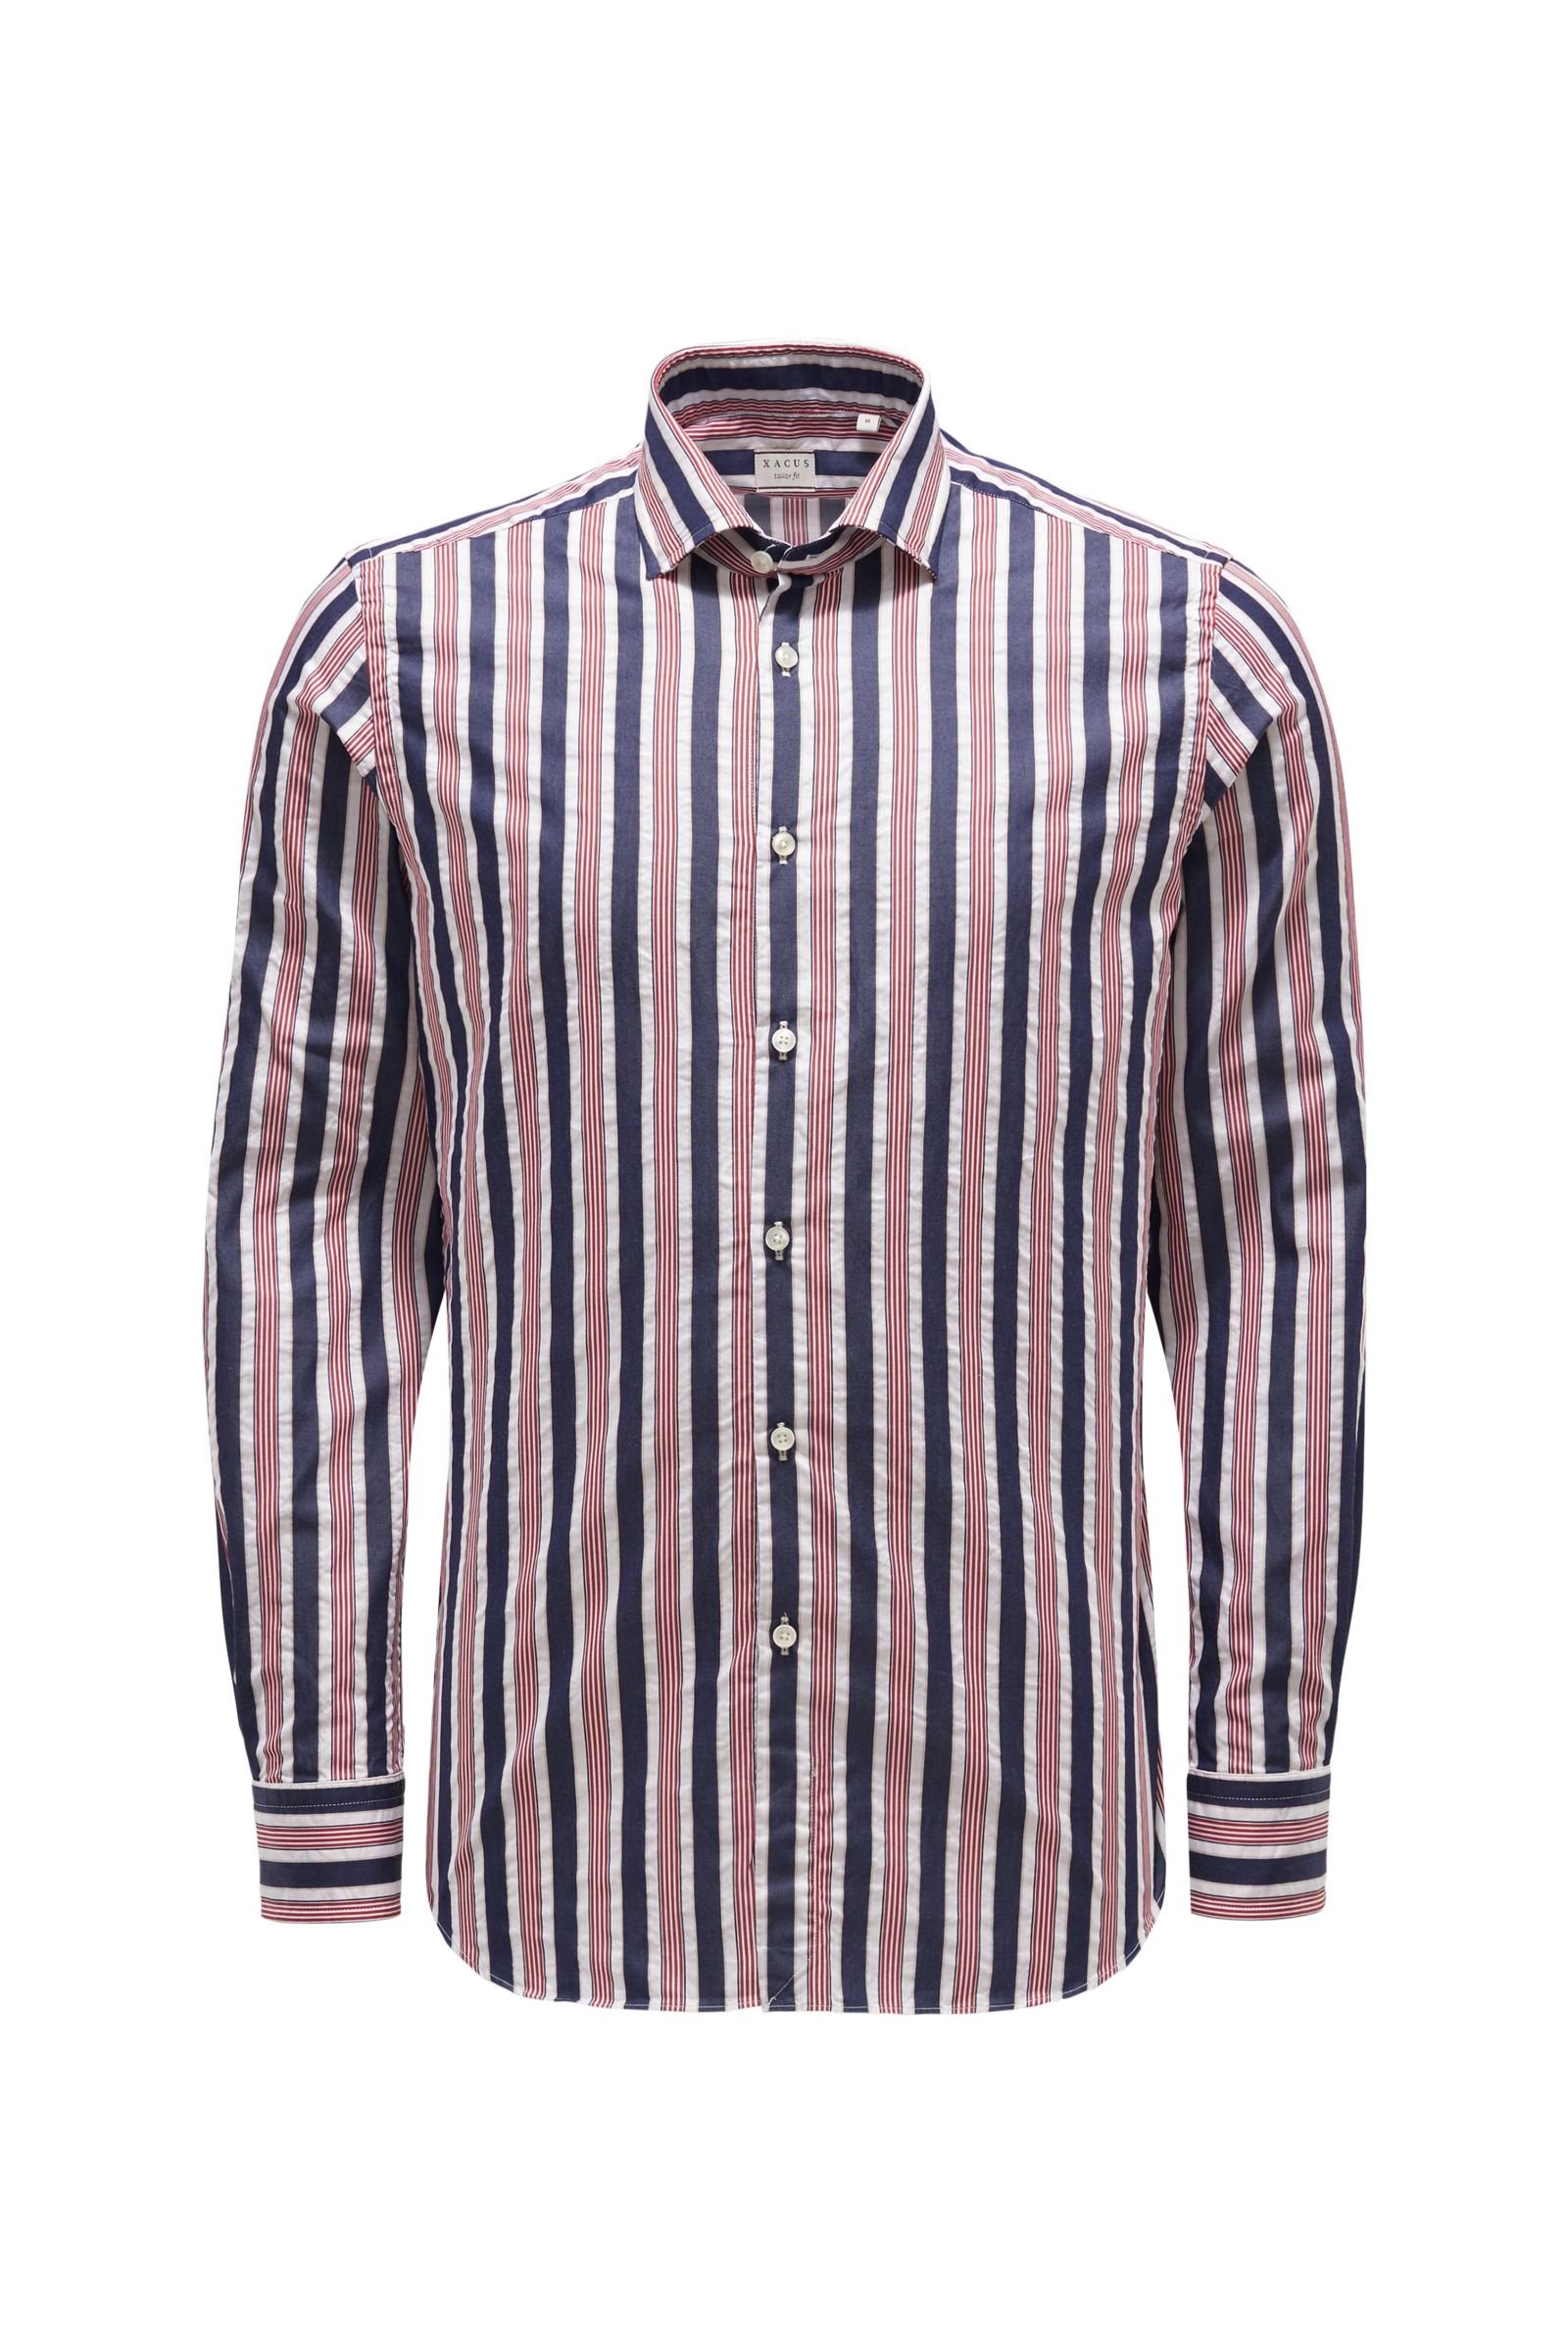 Casual shirt 'Tailor Fit' shark collar navy/red striped